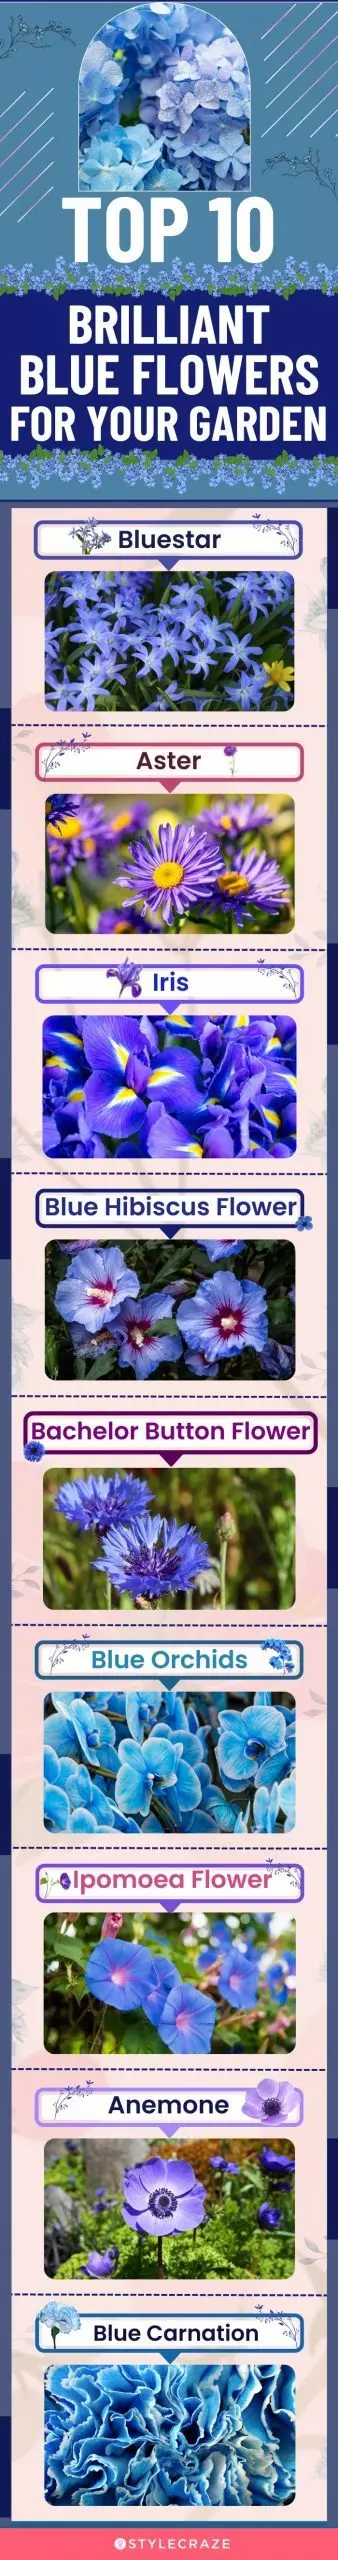 top 10 brilliant blue beautiful flowers for your garden (infographic)